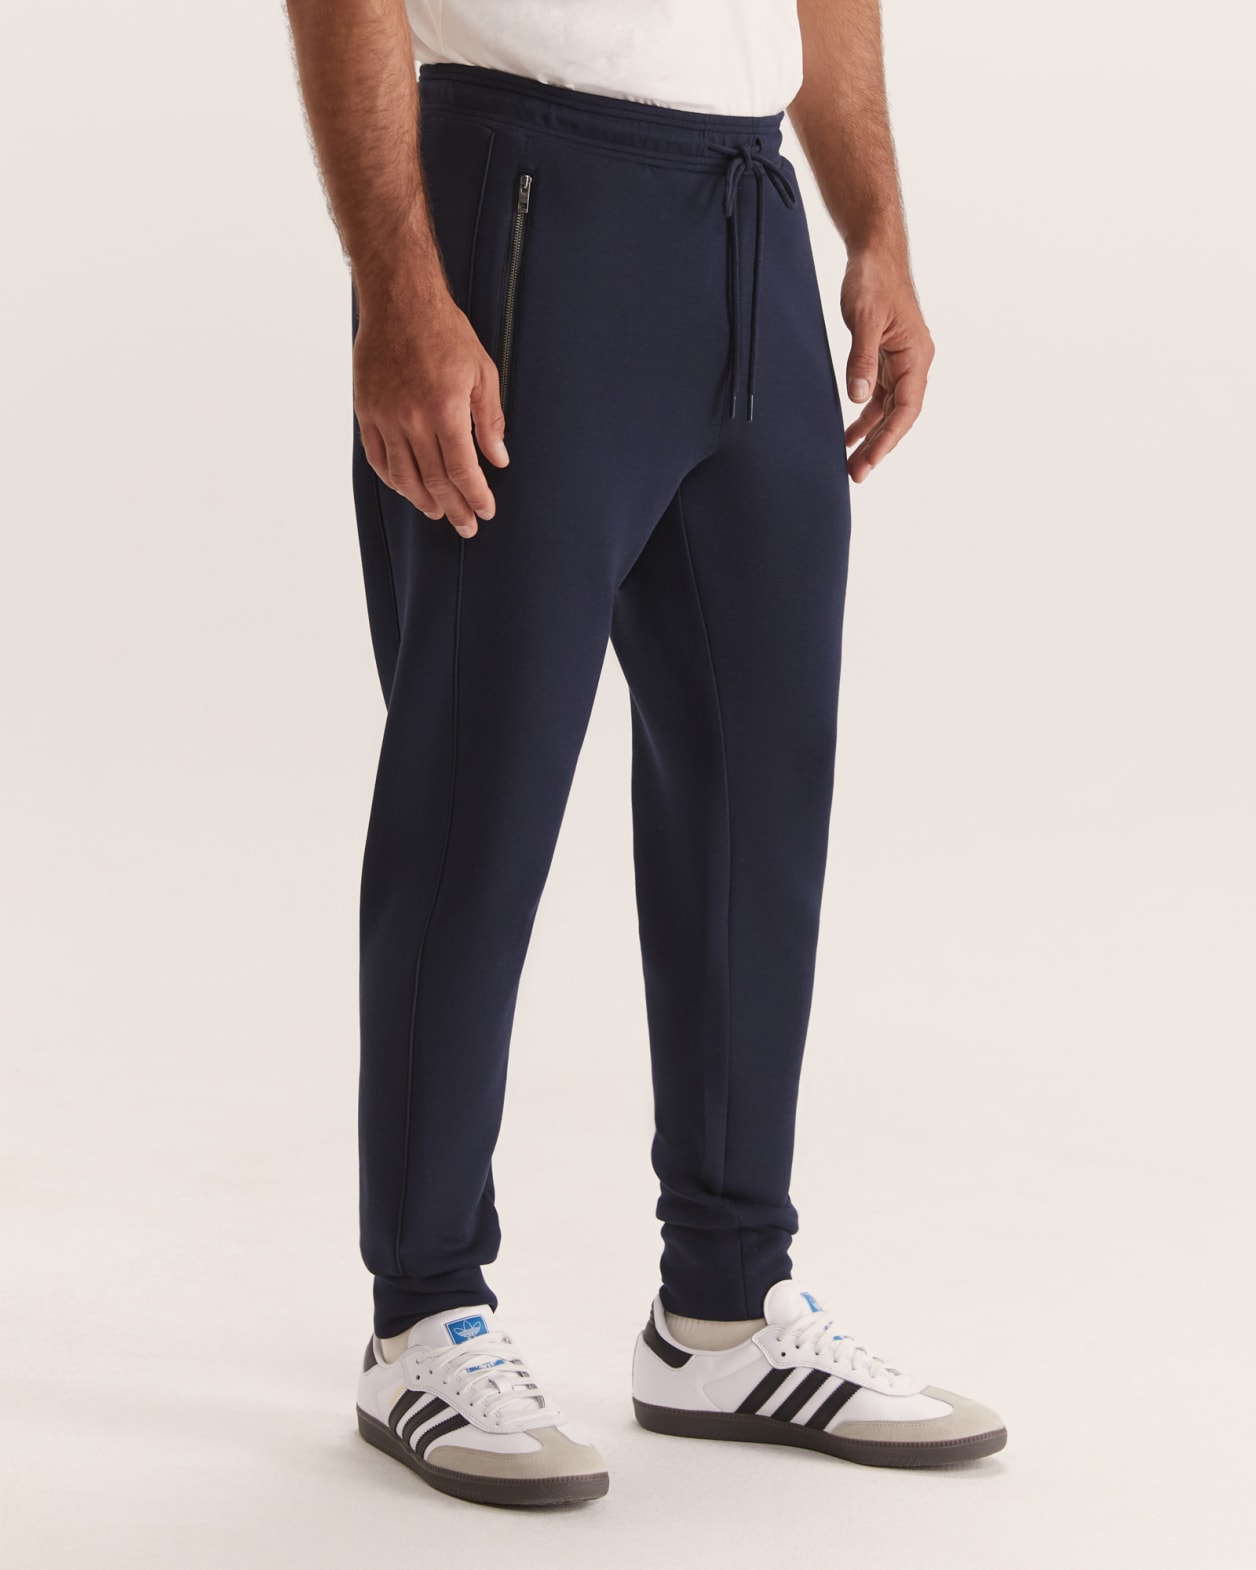 Victor Track Pant in NAVY